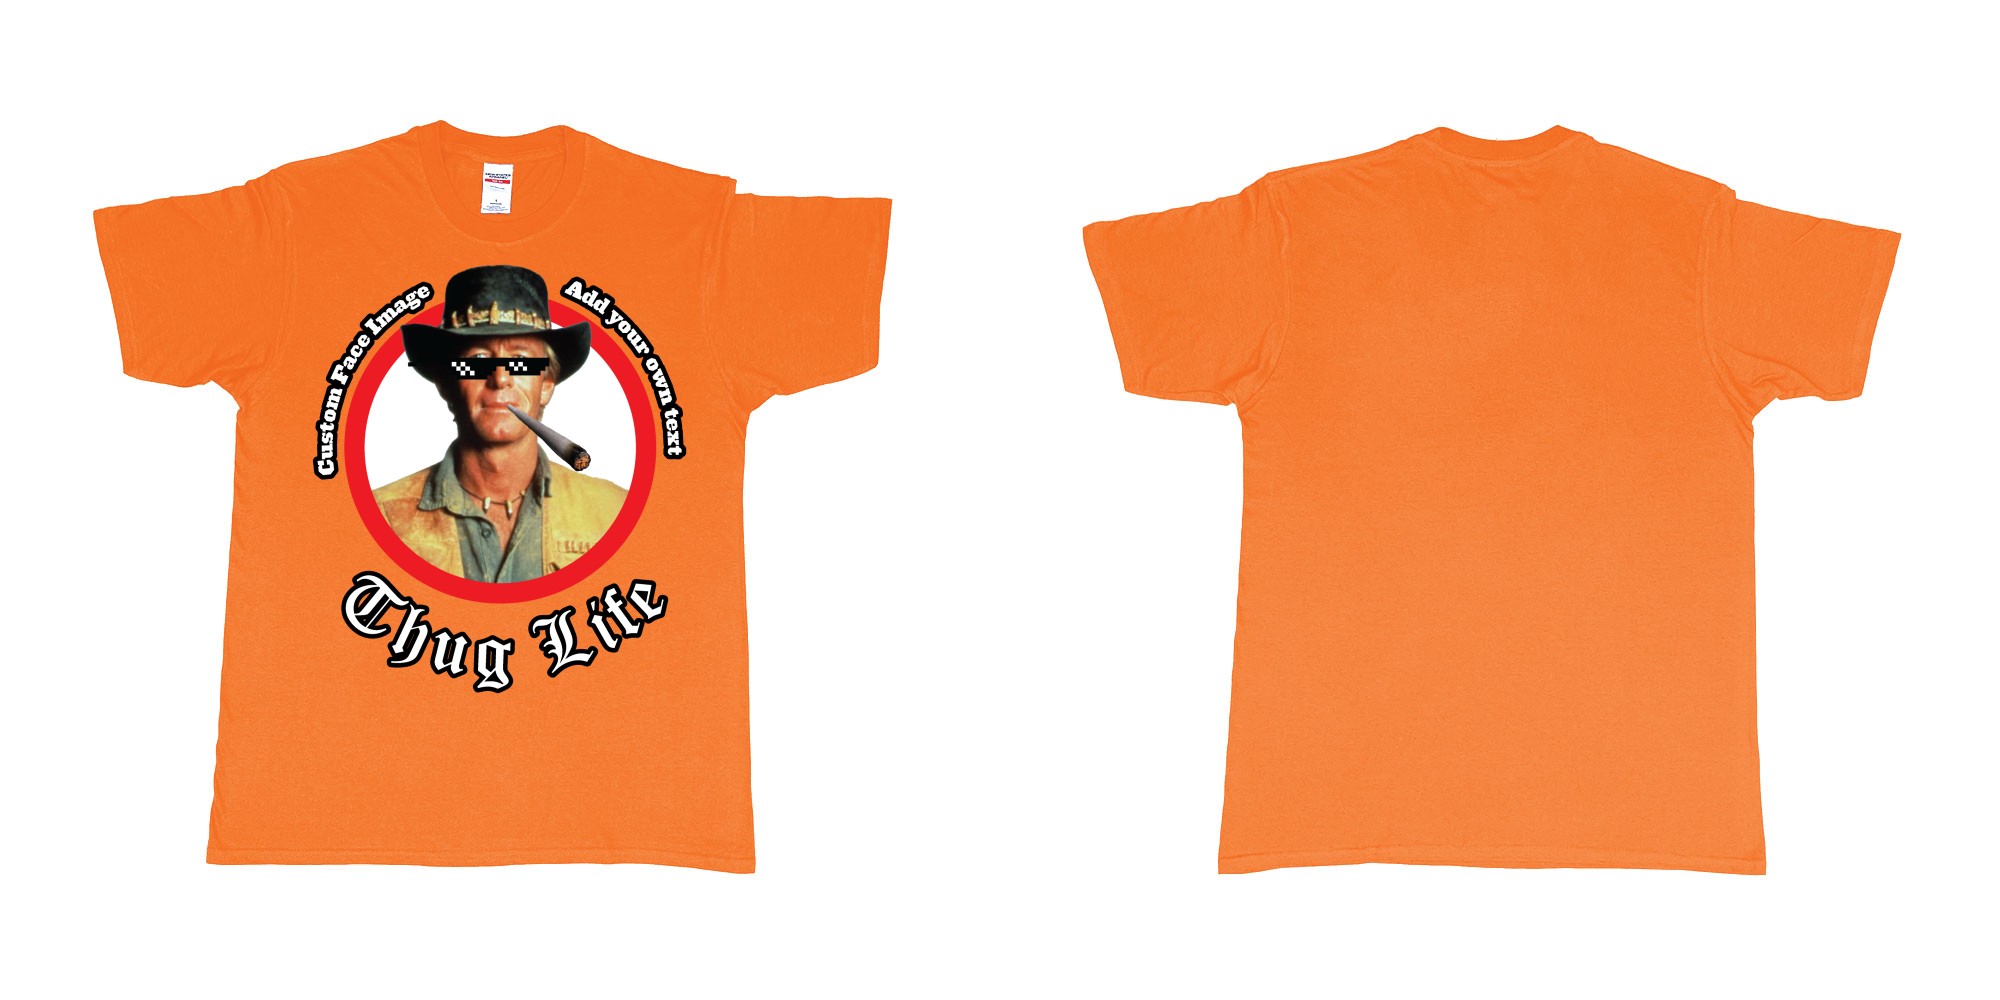 Custom tshirt design thug life meme sunglasses joint custom image in fabric color orange choice your own text made in Bali by The Pirate Way